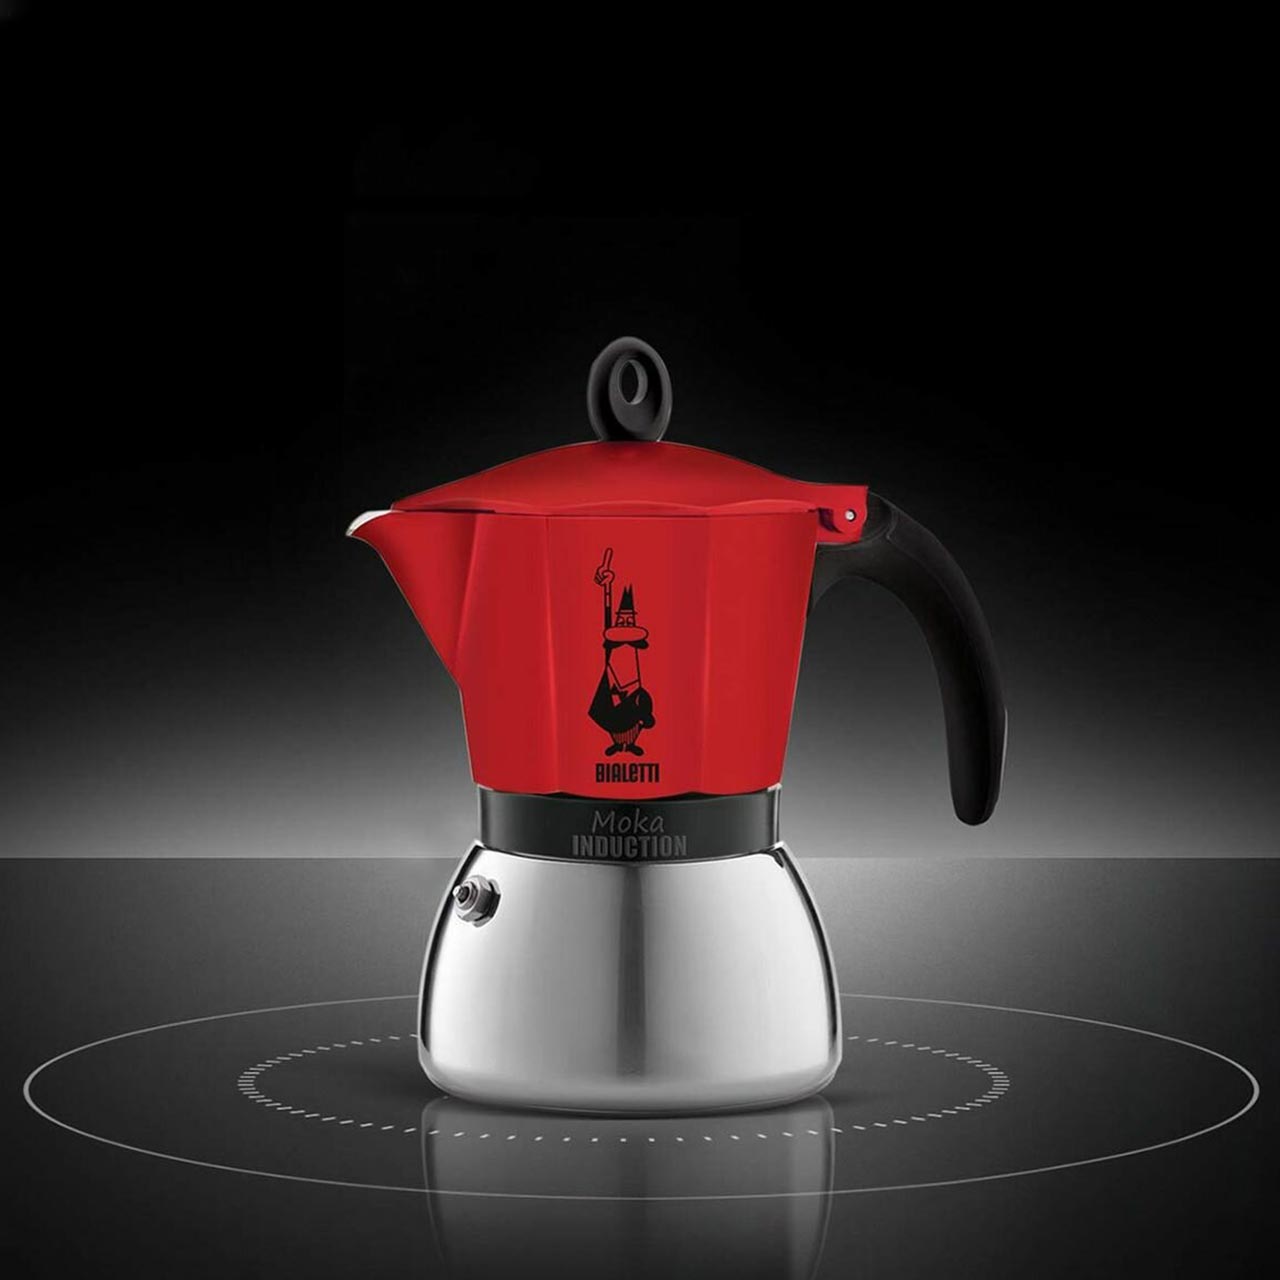 https://cdn11.bigcommerce.com/s-2plzc/images/stencil/original/products/2178/33015/Bialetti-moka-induction-red-6-cup-CM822-3-1-op__19056.1634687807.jpg?c=2